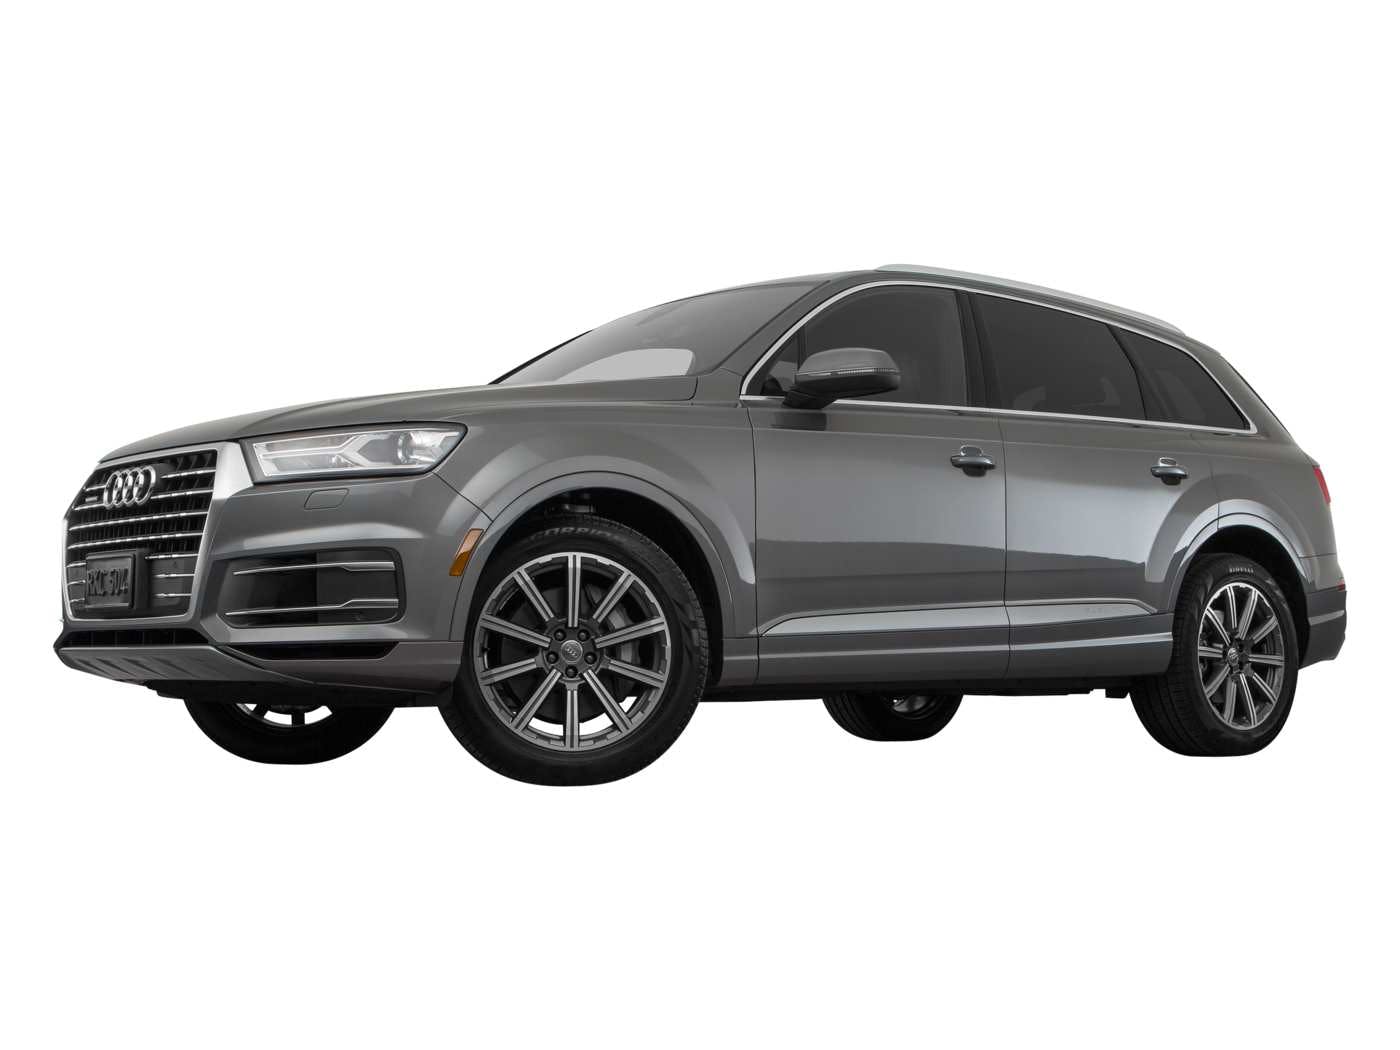 2019 Audi Q7 SUV: Latest Prices, Reviews, Specs, Photos and Incentives